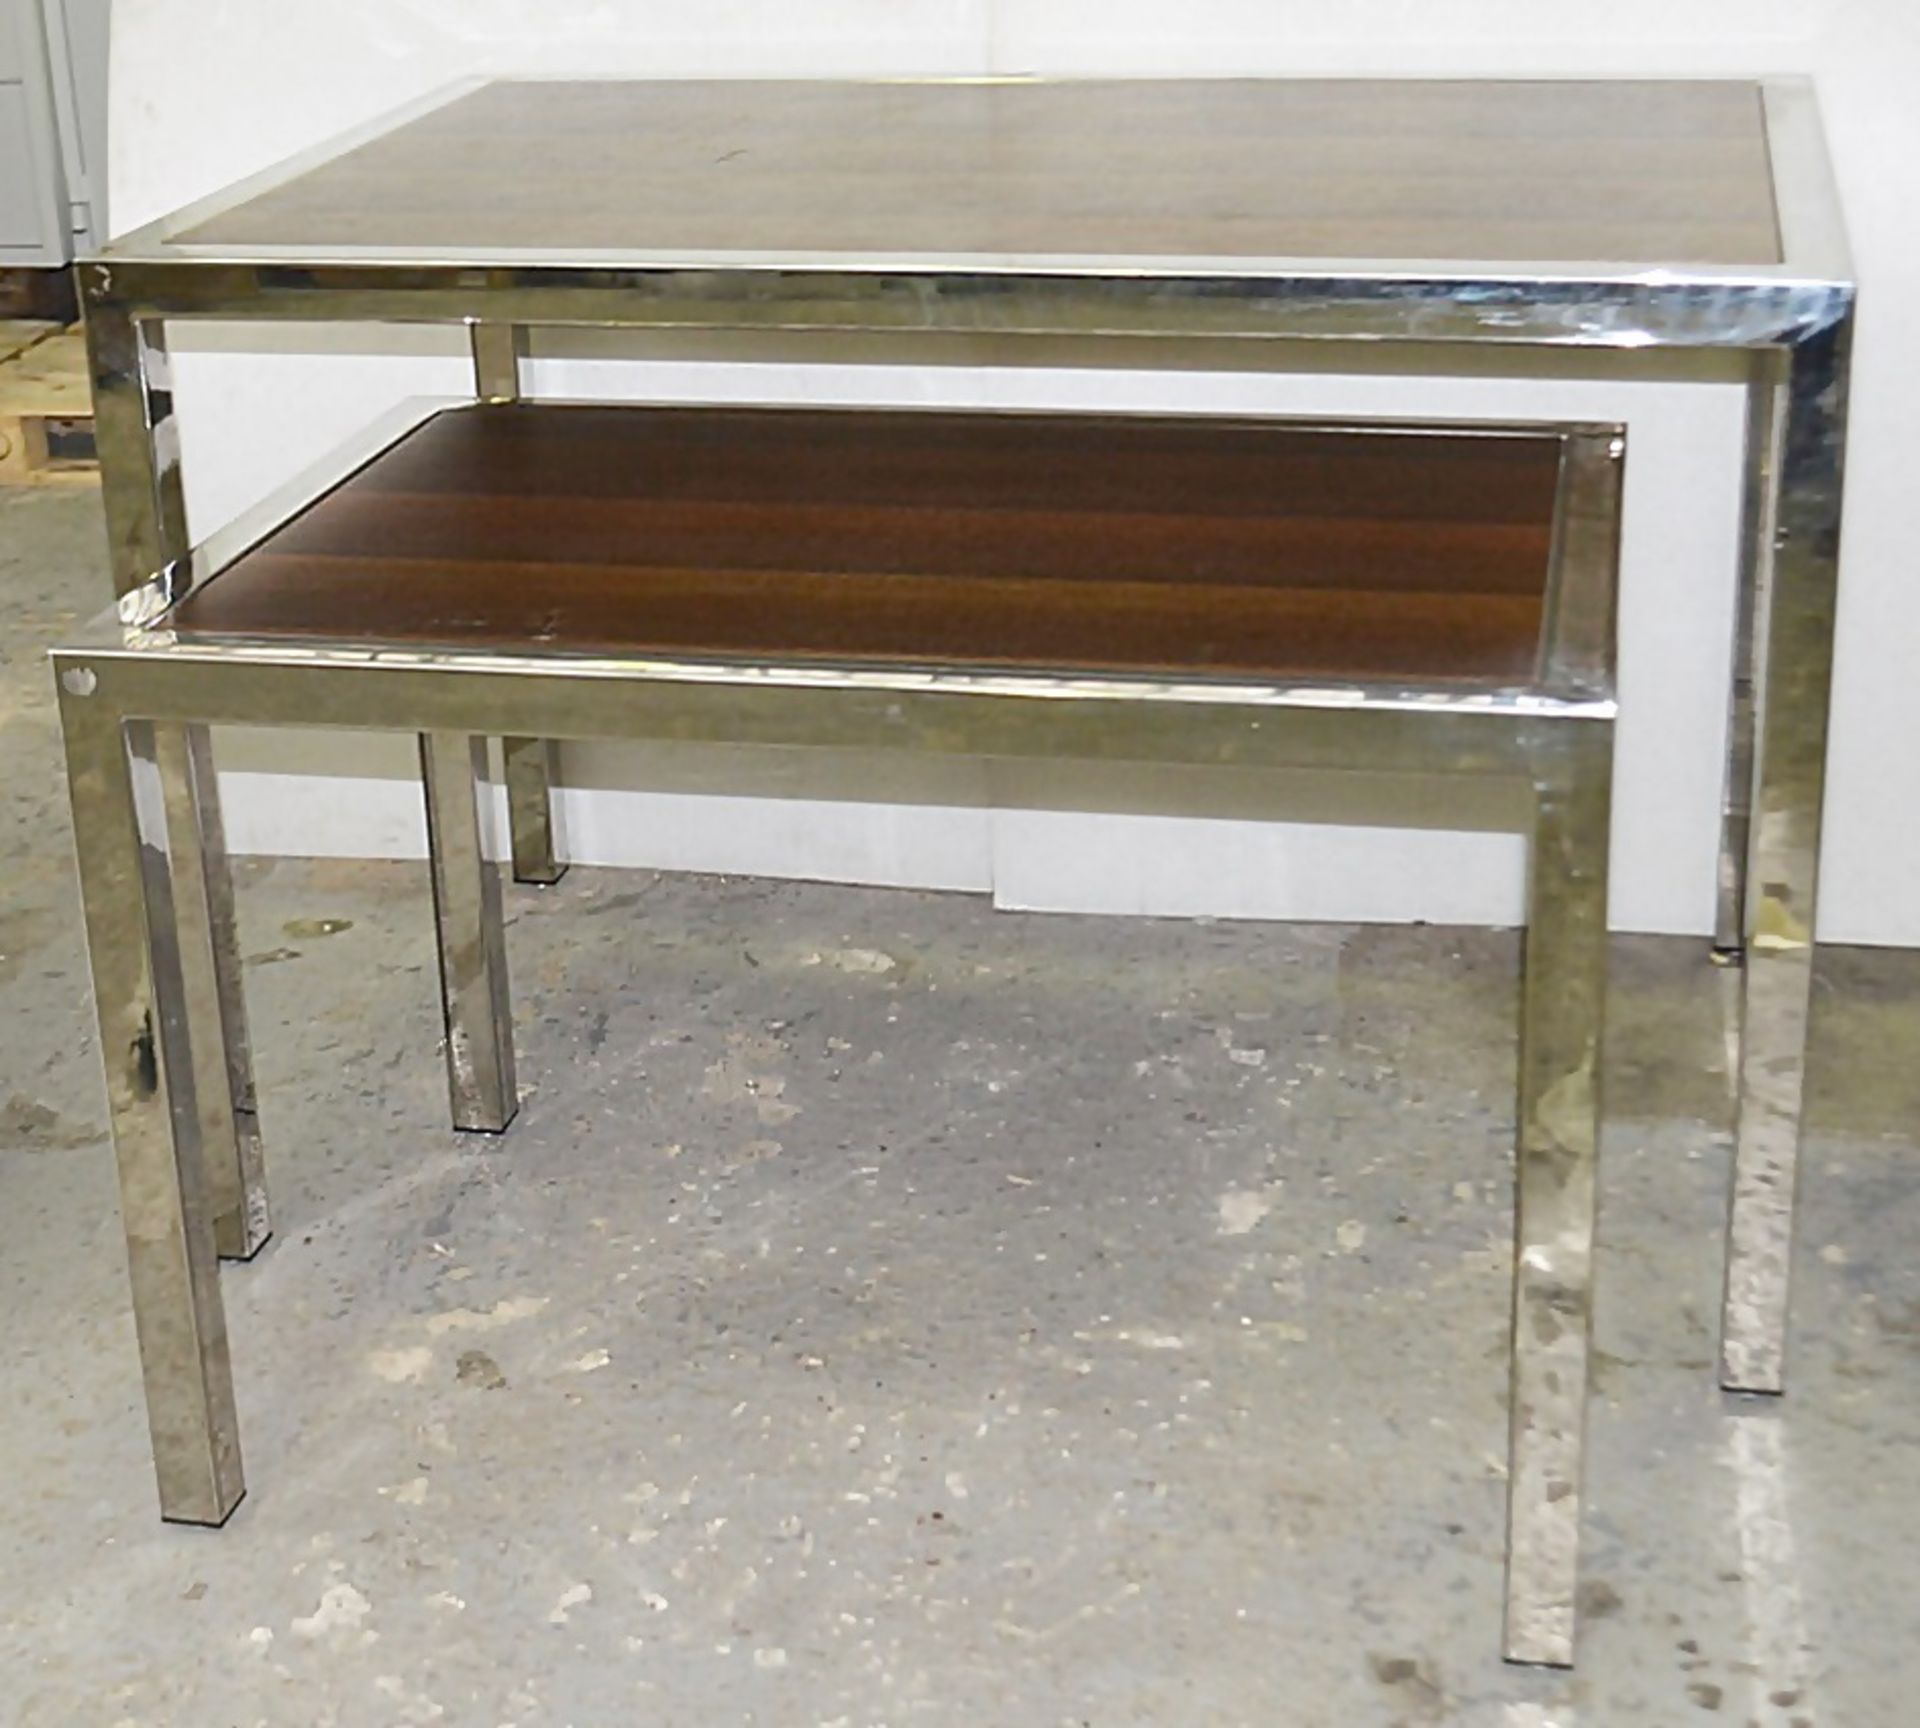 Set of 2 x Large Nesting Display Tables With Chrome Frames - Ex-Showroom Piece - Ref: HAR155 GIT - - Image 3 of 6